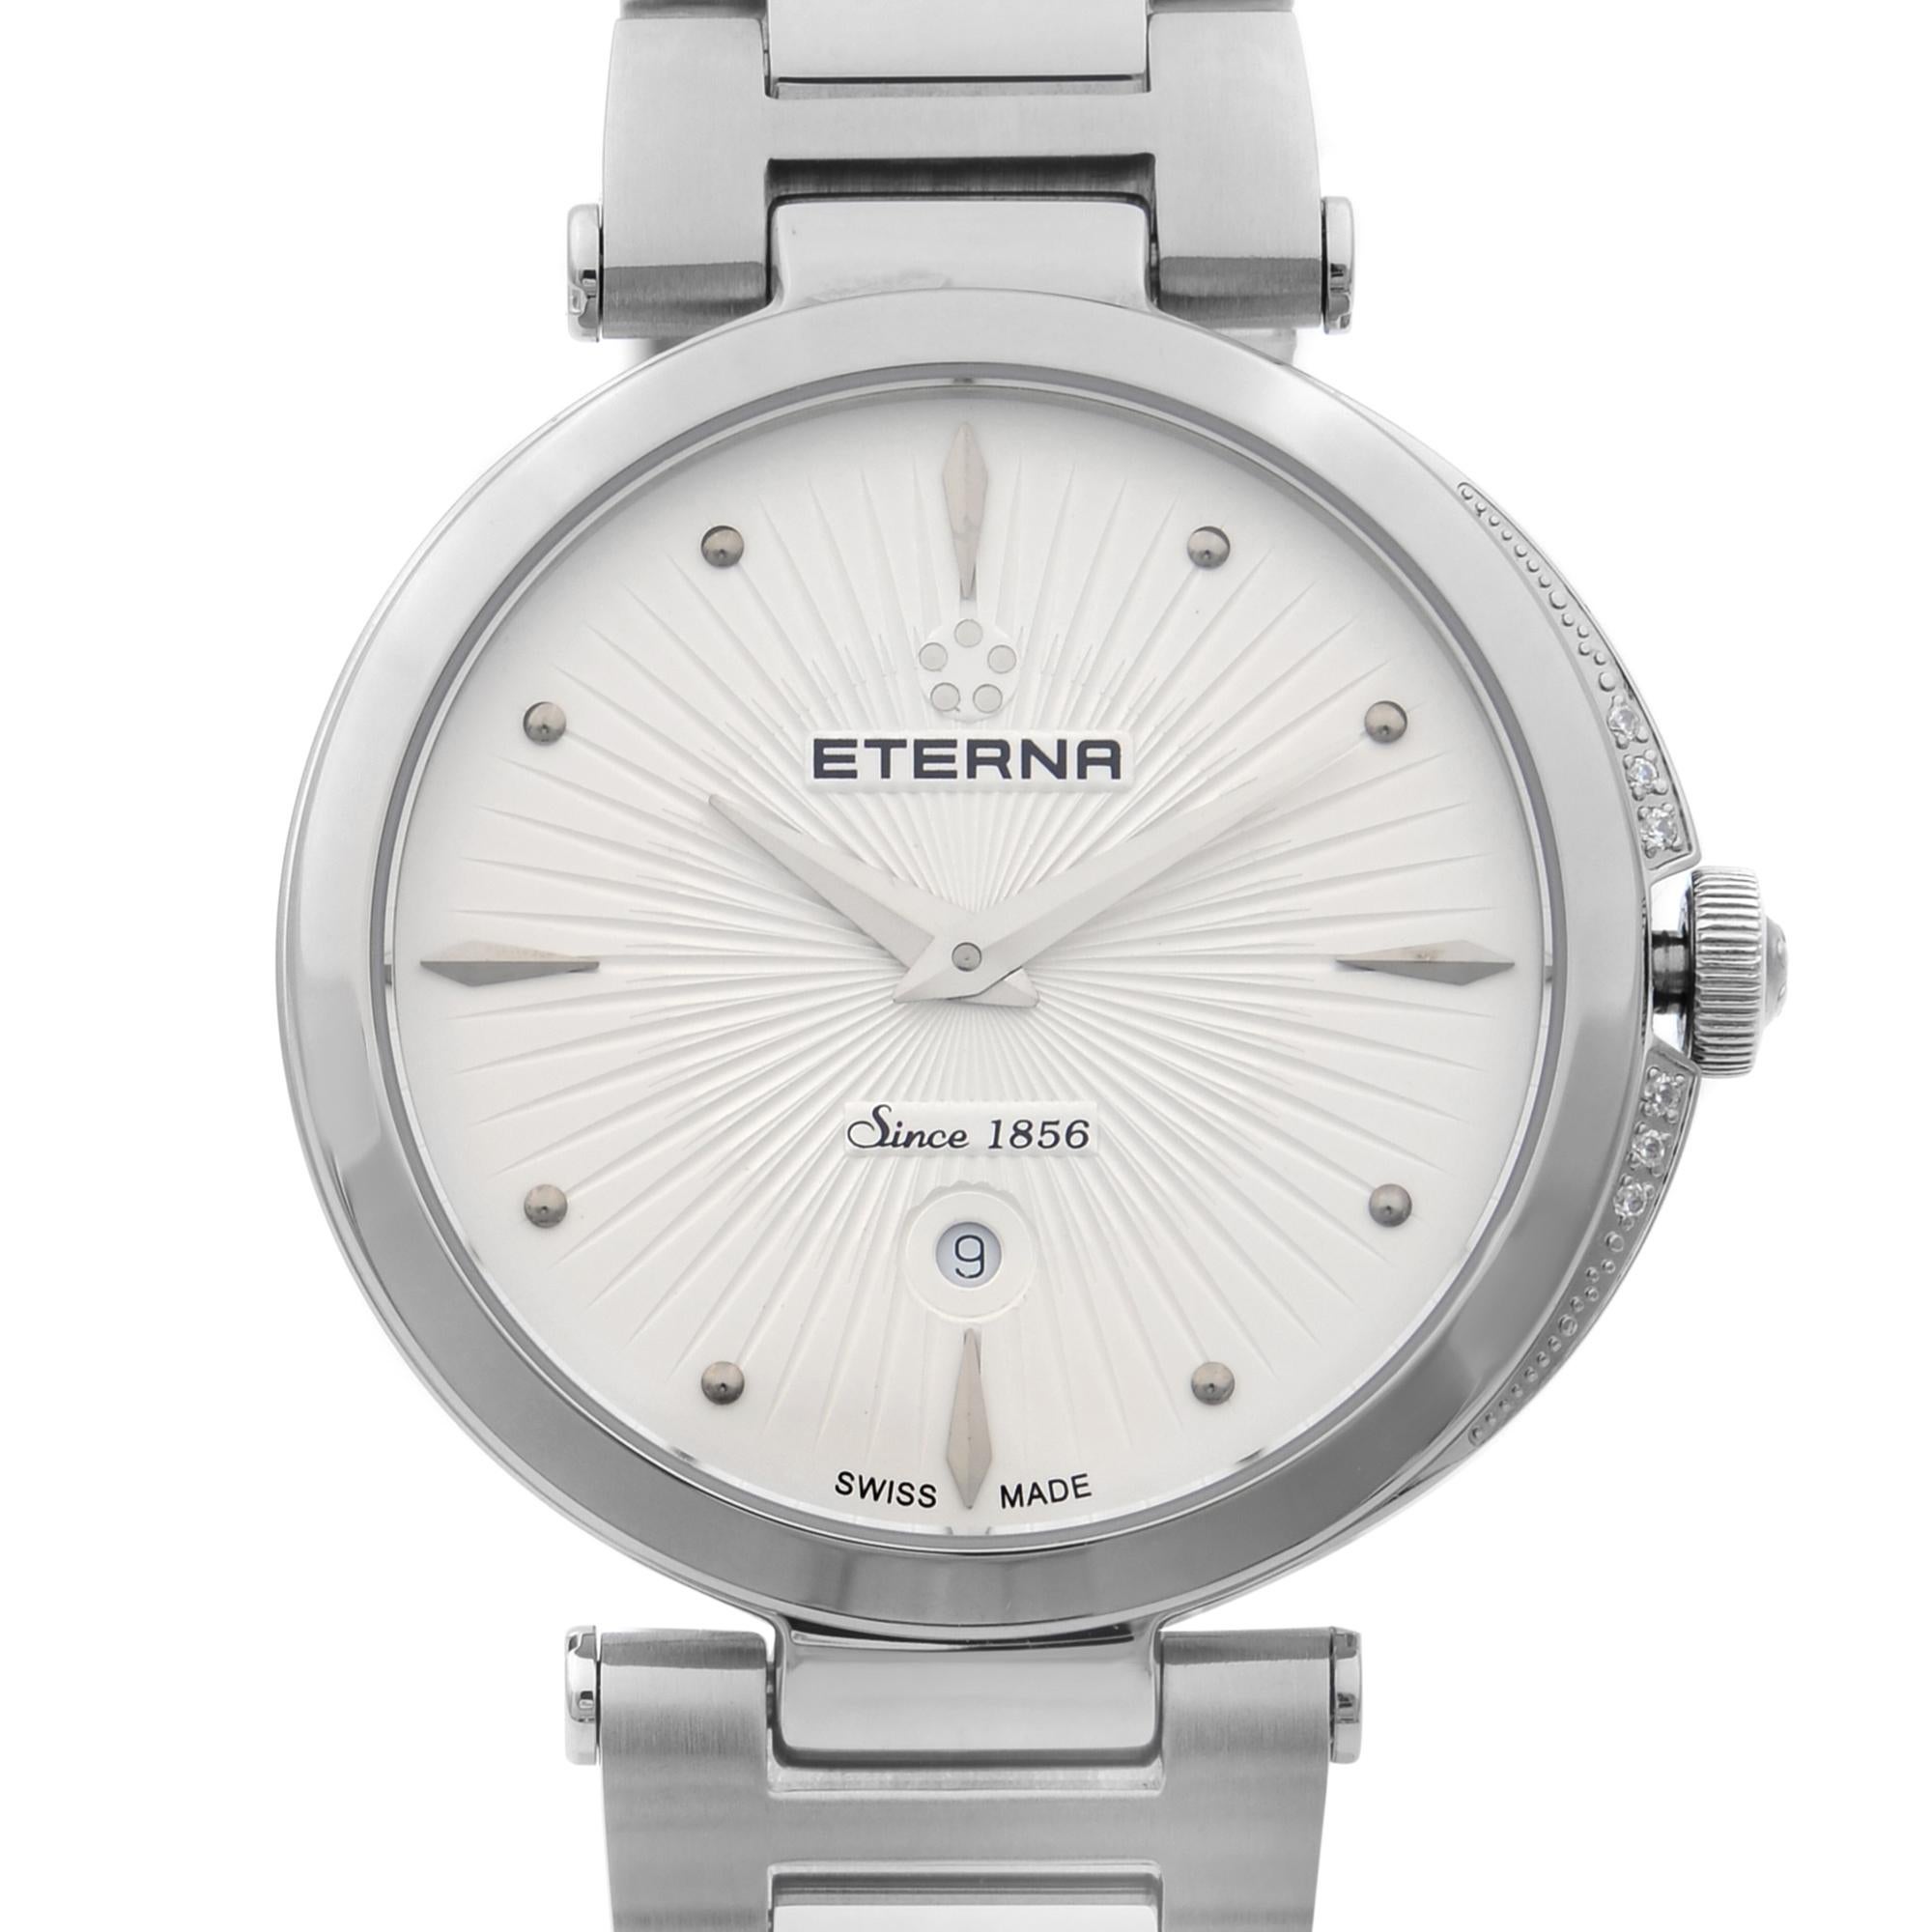 This display model Eterna Grace 2560.54.66.1713 is a beautiful Ladie's timepiece that is powered by quartz (battery) movement which is cased in a stainless steel case. It has a round shape face, date indicator dial and has hand dots, sticks style